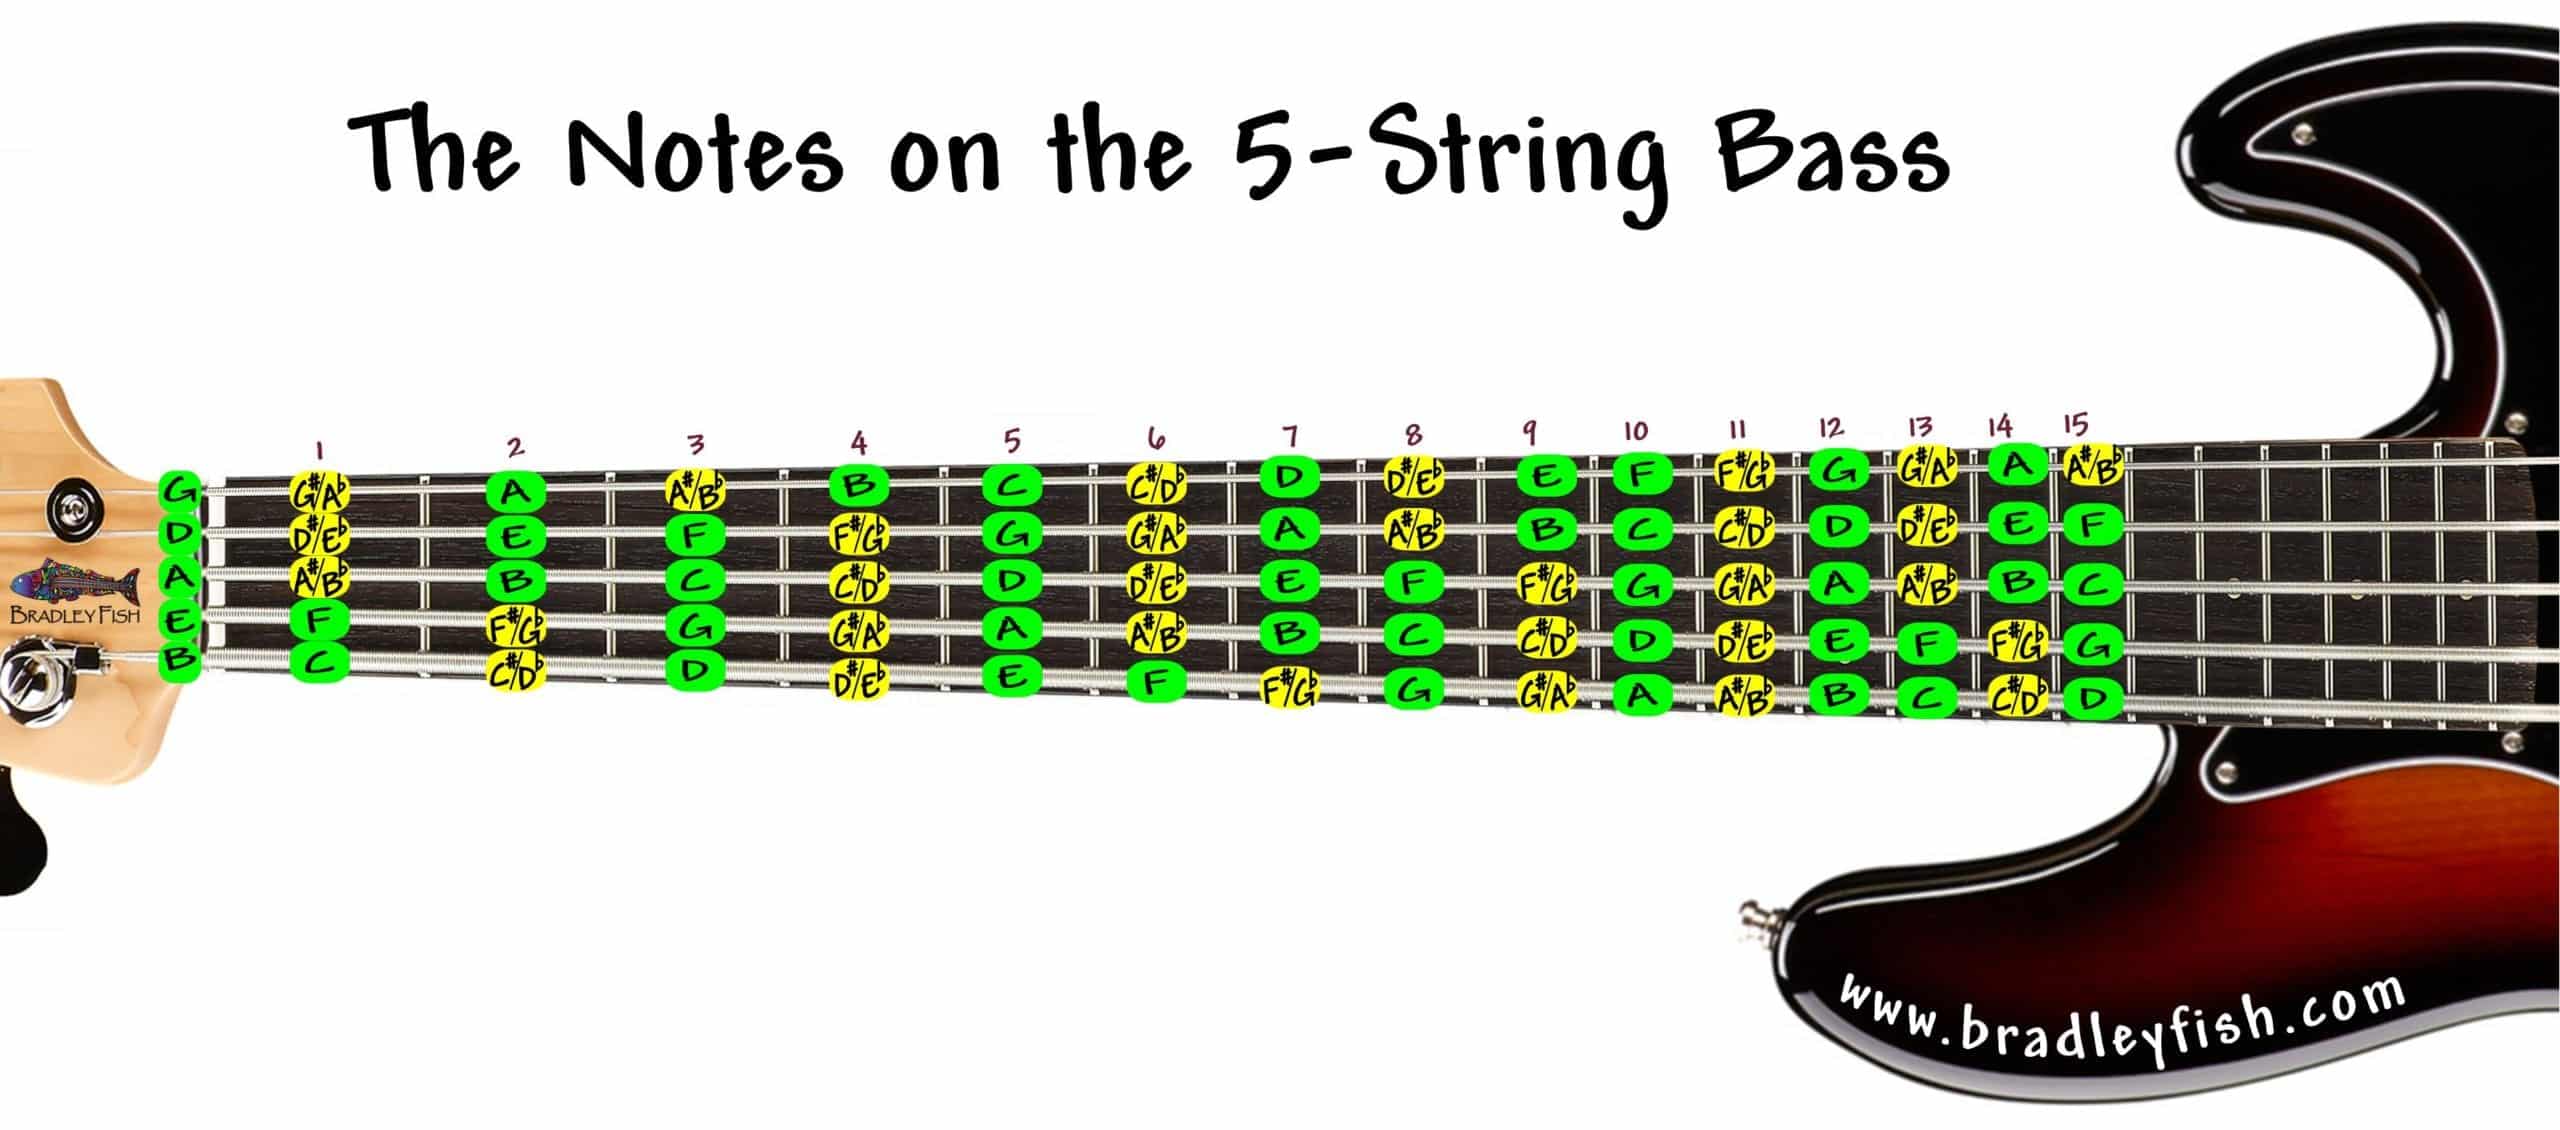 The Notes on the 5 String Bass!! Bradley Fish